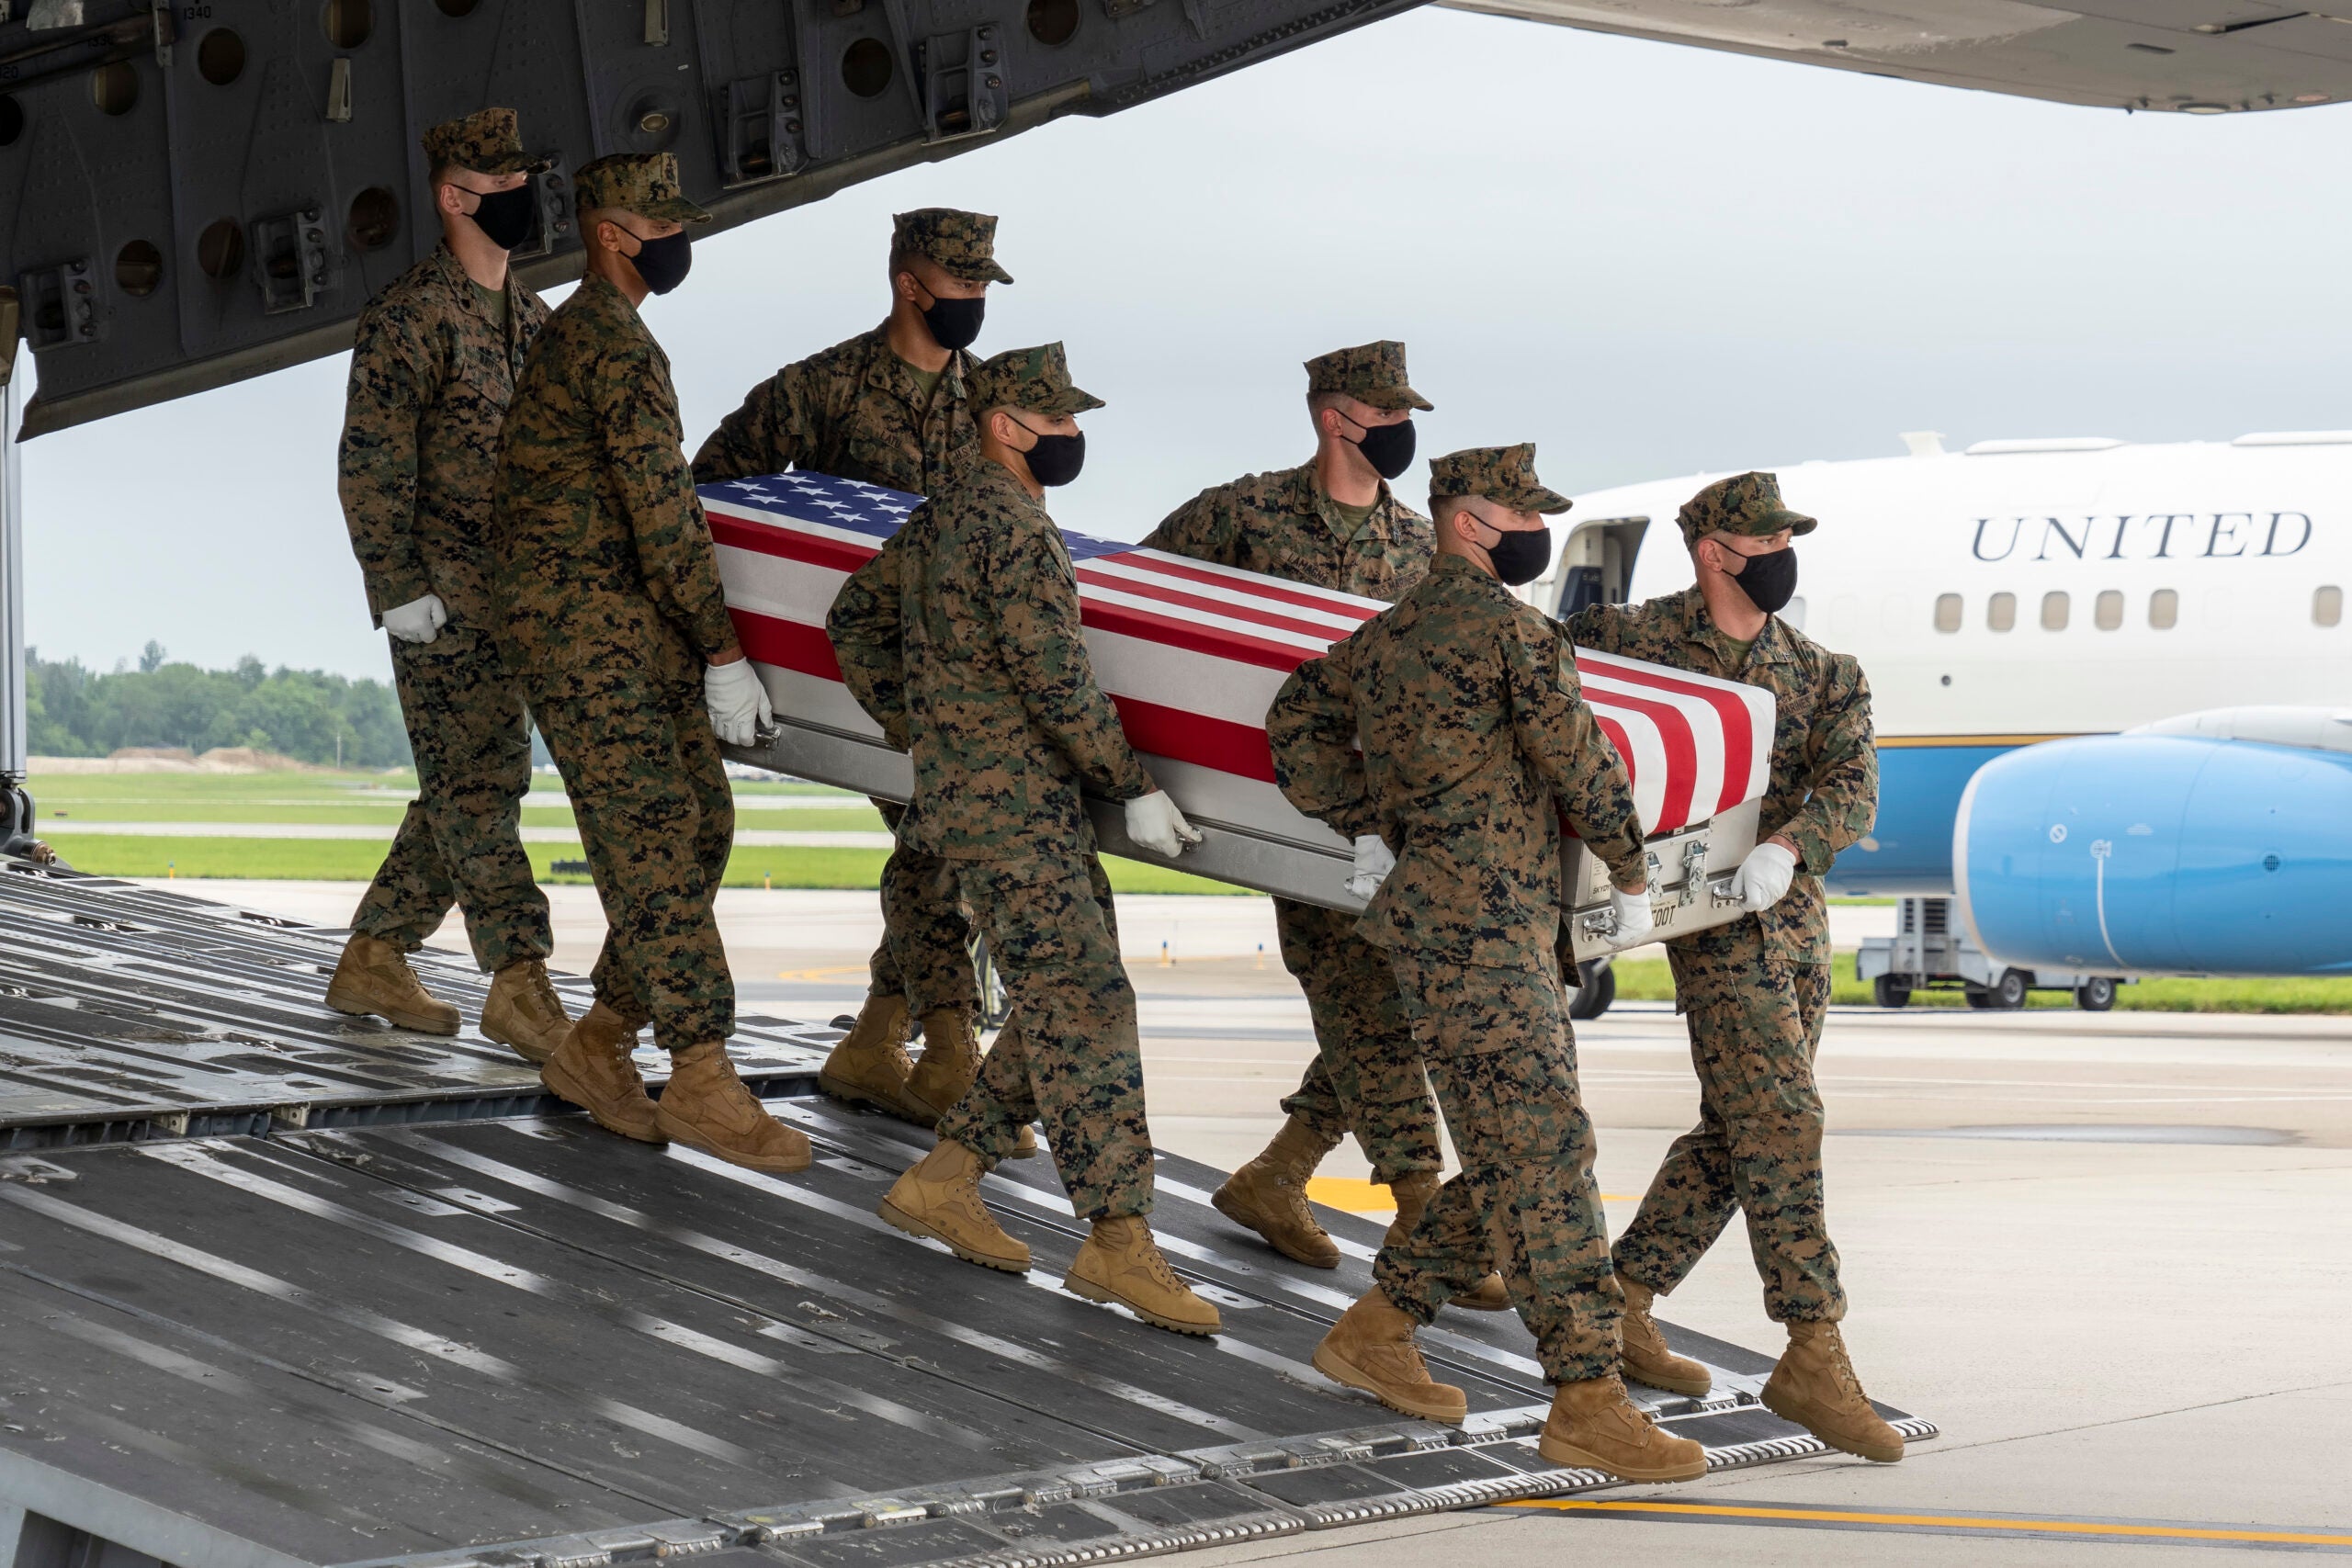 DOVER, DELAWARE - AUGUST 29: In this handout photo provided by the U.S. Air Force, a U.S. Marine Corps carry team transfers the remains of Marine Corps Sgt. Nicole L. Gee of Sacramento, California, Aug. 29, 2021 at Dover Air Force Base, Delaware. Gee was assigned to Combat Logistics Battalion 24, 24th Marine Expeditionary Group, II Marine Expeditionary Force, Camp Lejeune, North Carolina.  (Photo by Jason Minto/U.S. Air Force via Getty Images)